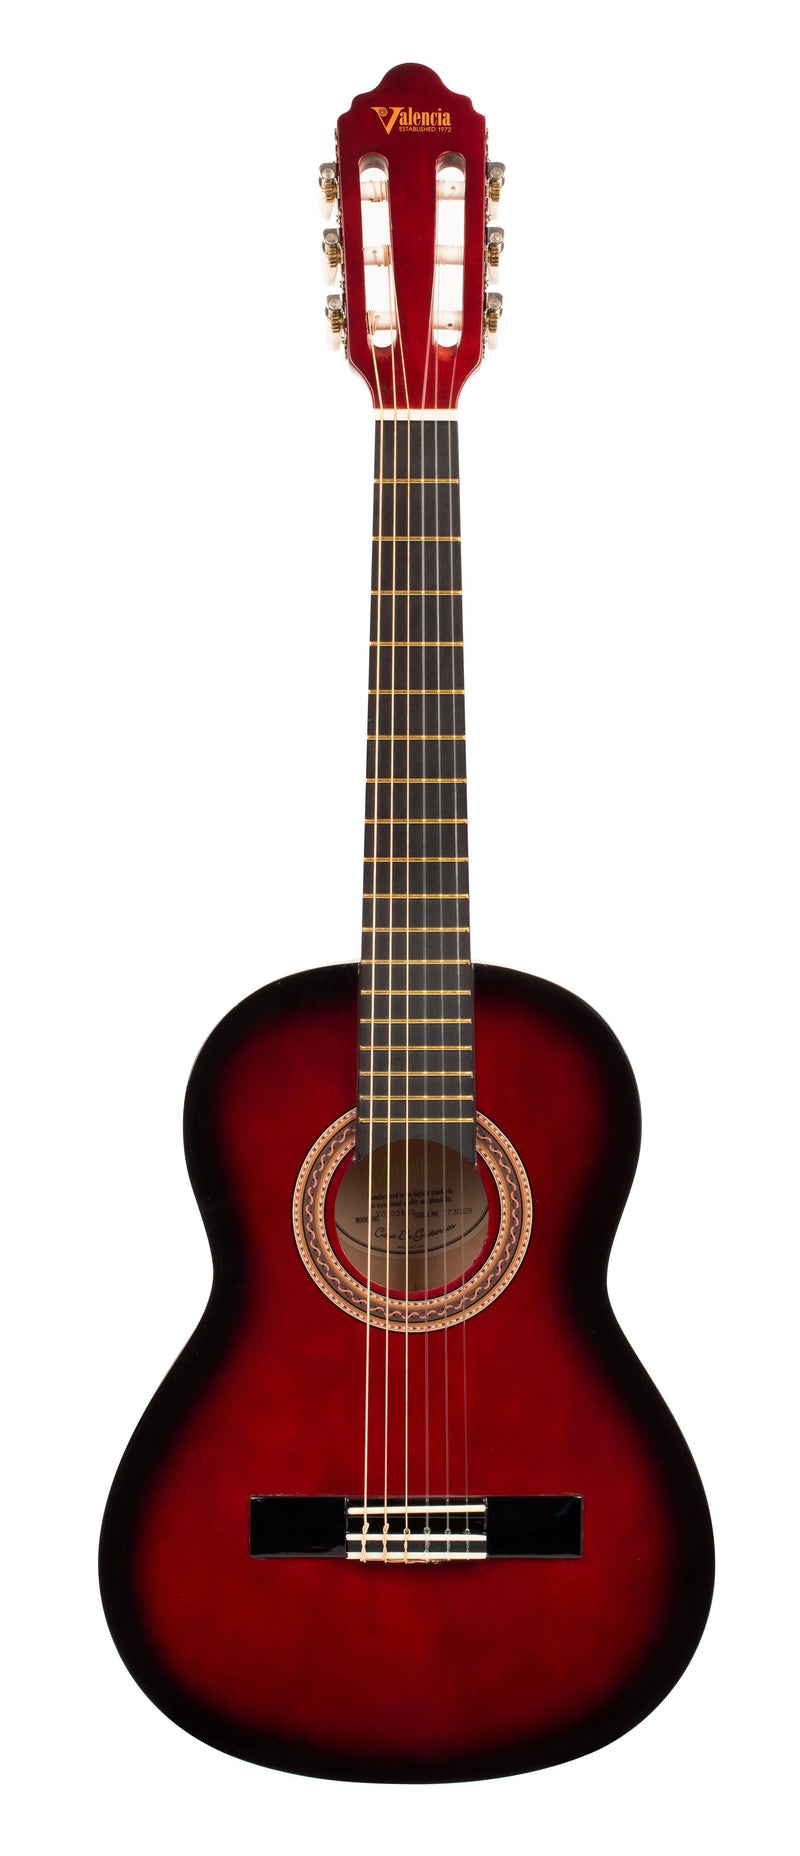 Valencia 100 Series 1/2 Classical Guitar - Red at Five Star Music 102 Maroondah Highway Ringwood Melbourne Music Guitar Store.